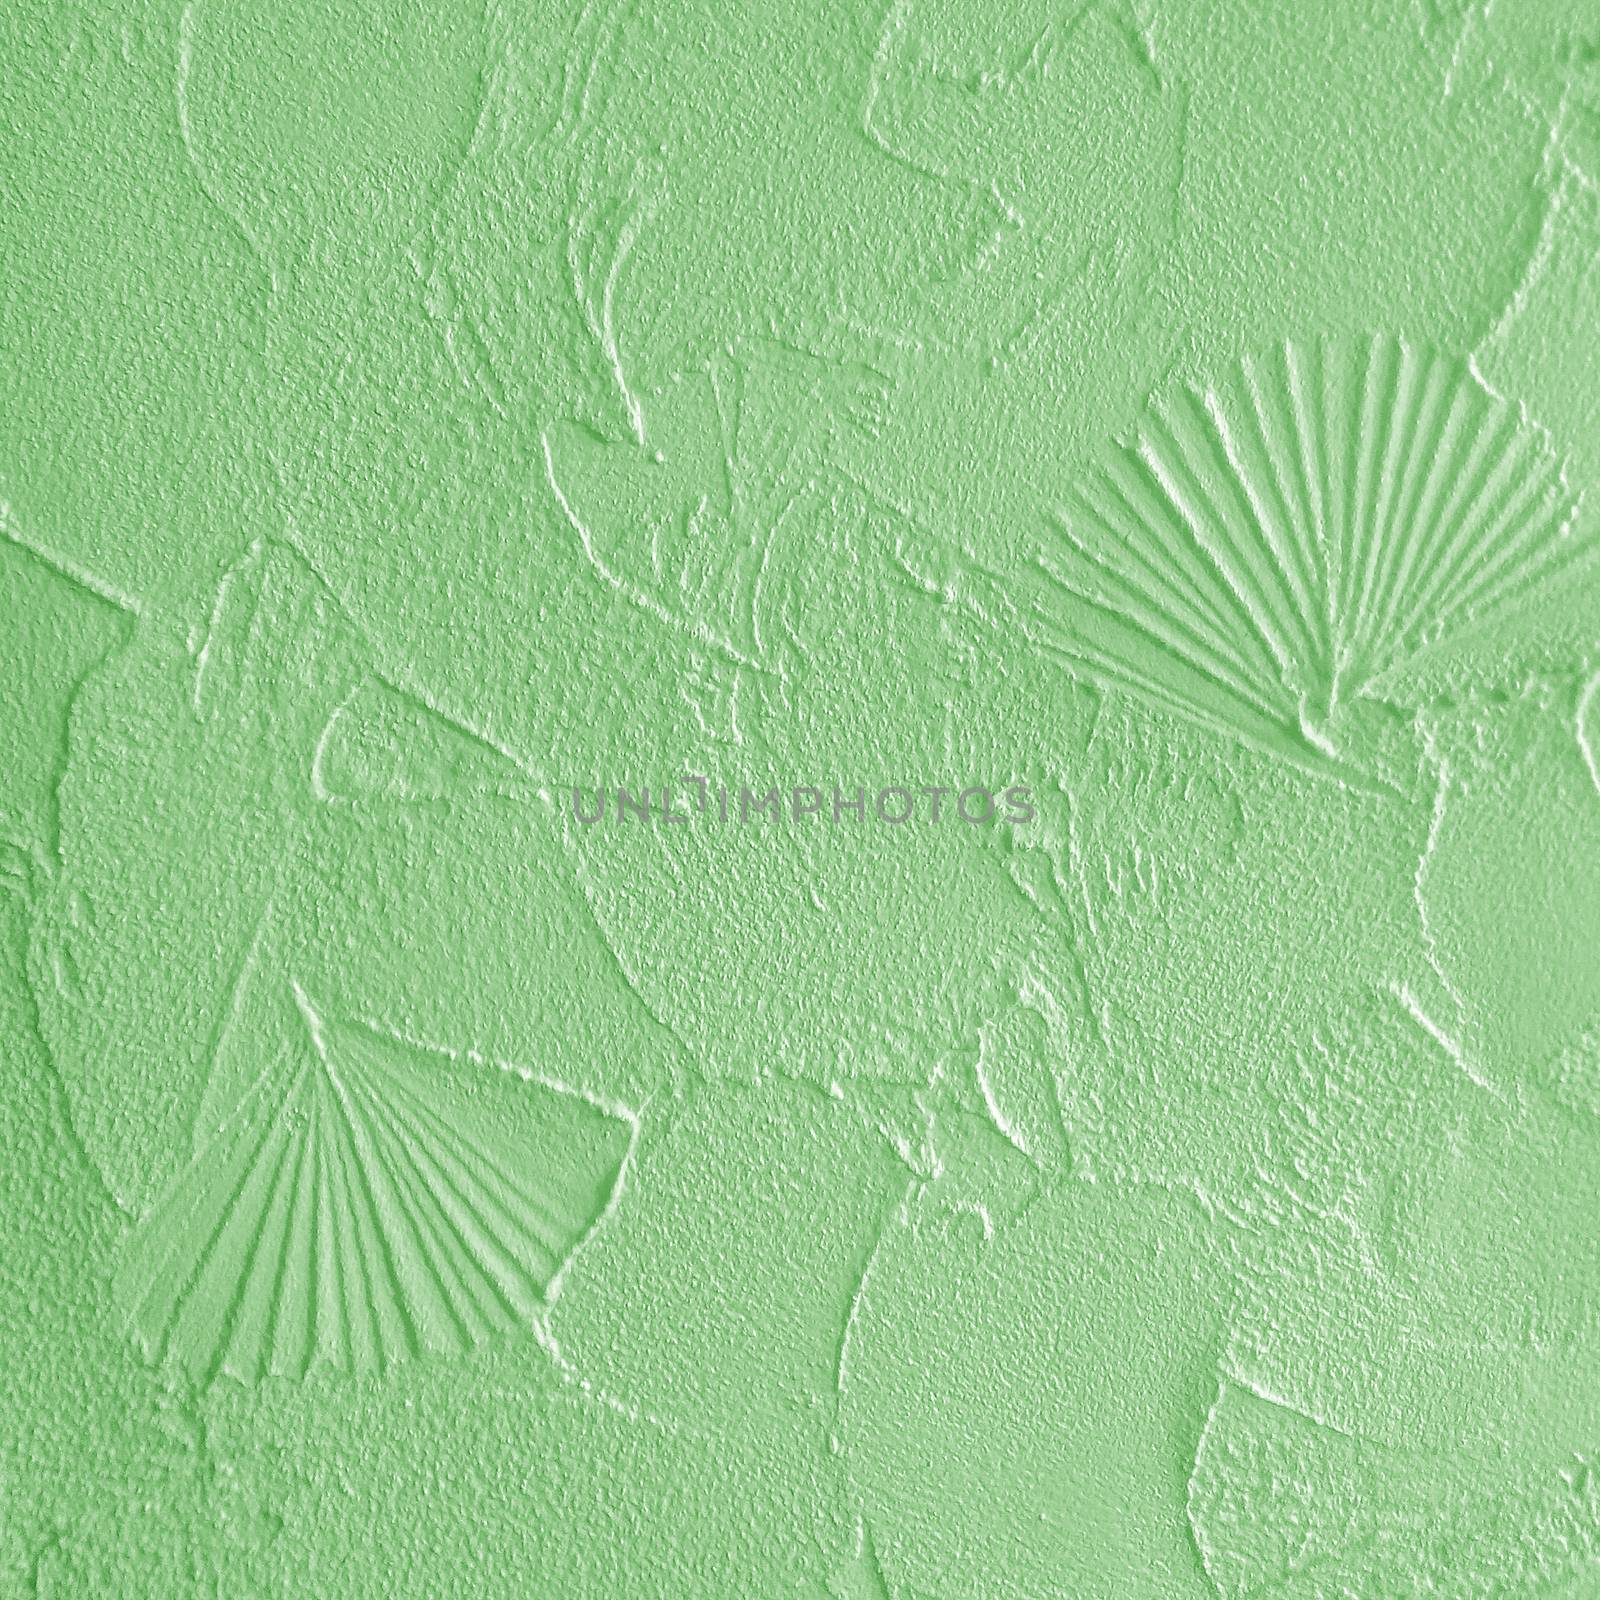 Green background of the structural plaster on the wall                         